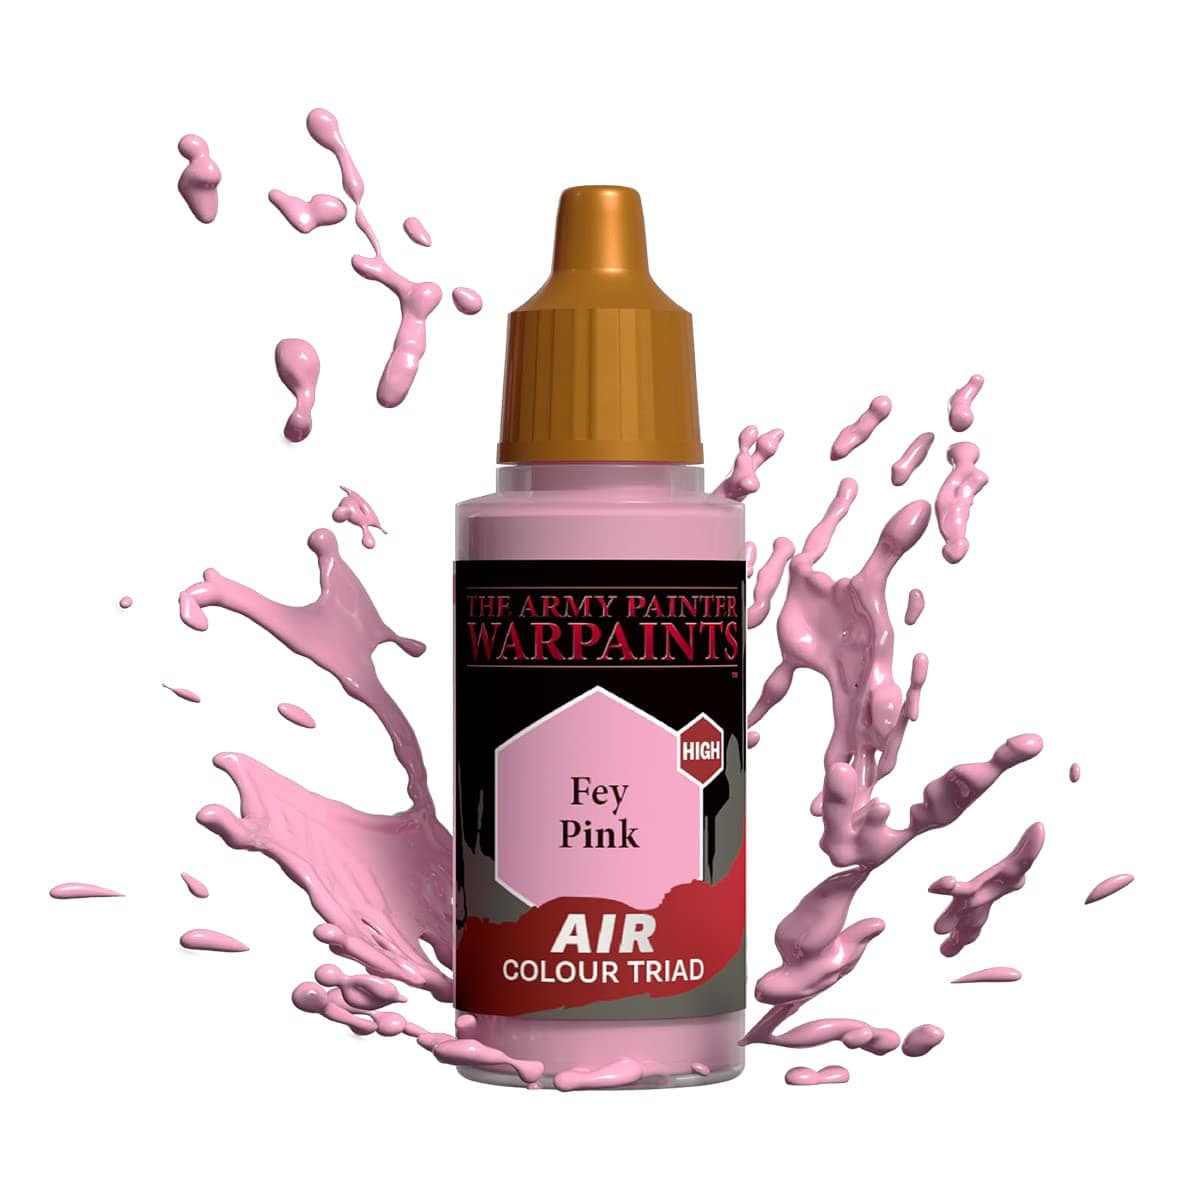 The Army Painter Accessories The Army Painter Warpaints Air: Fey Pink 18ml